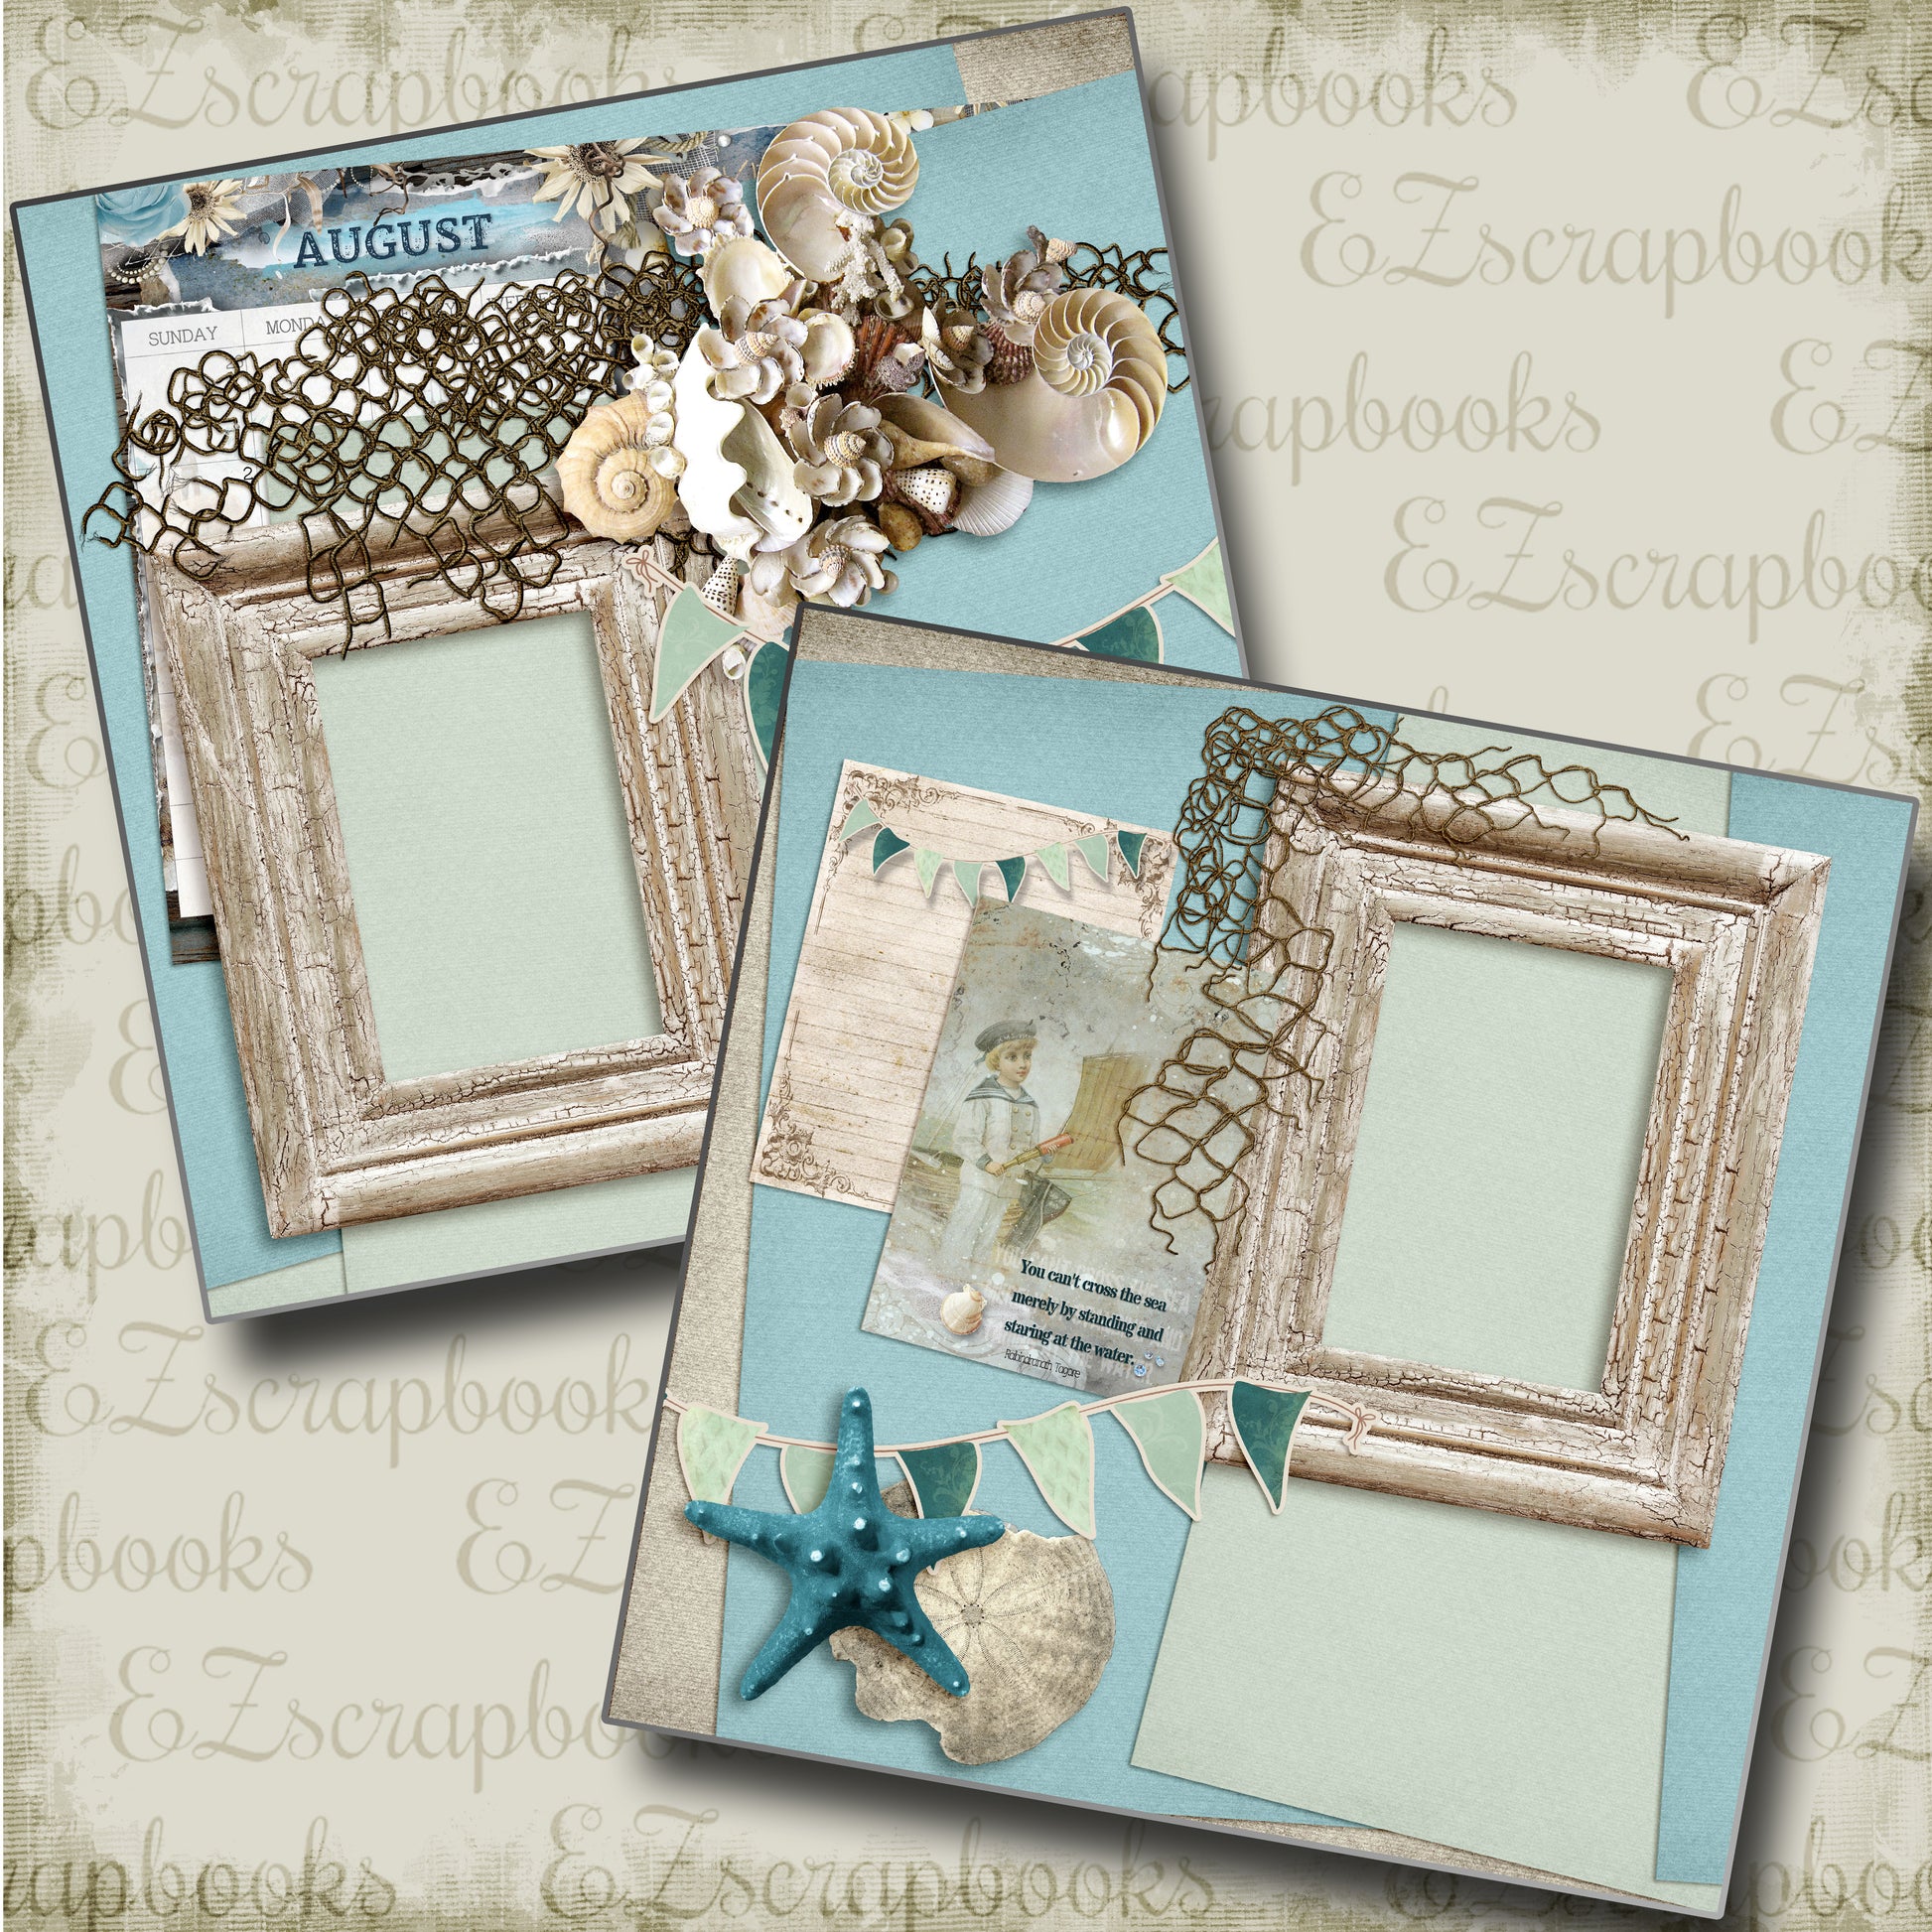 August - 4836 - EZscrapbooks Scrapbook Layouts Months of the Year